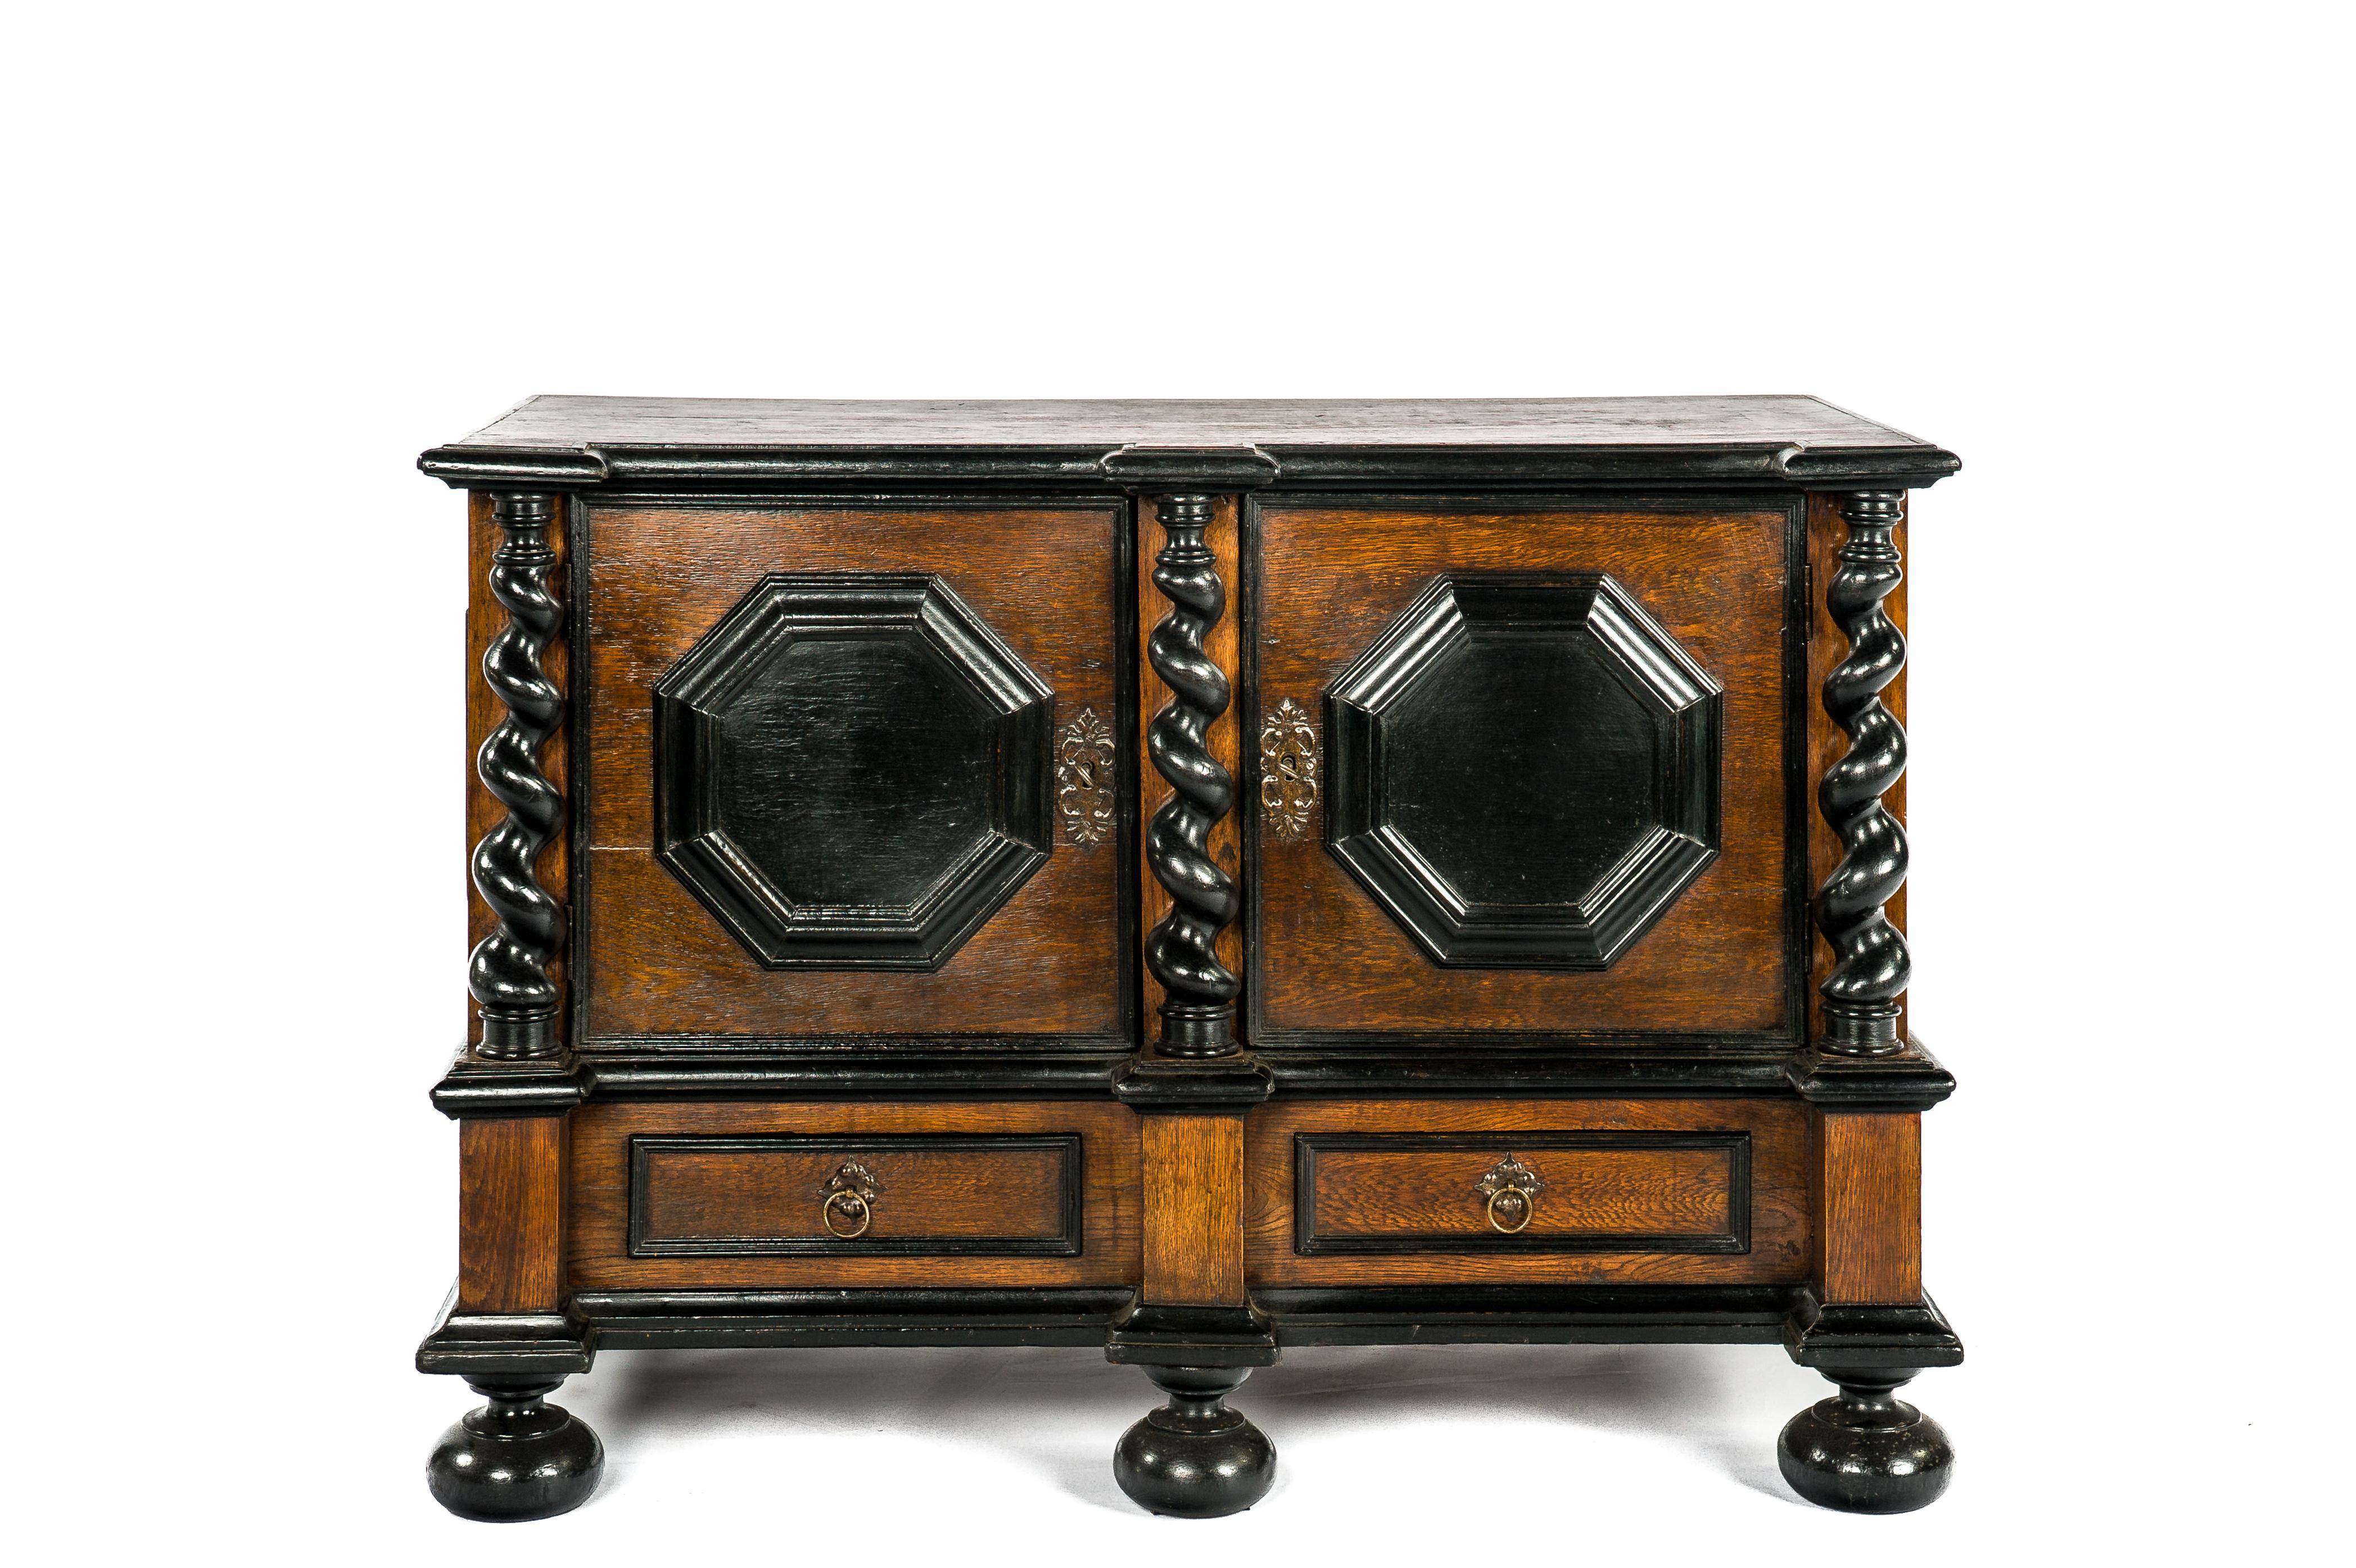 A very handsome Baroque-style cabinet was made in Germany at the end of the 18th century. It has a detachable base with a drawer over bun feet. Above sits a compartment with two paneled doors flanked by barely twisted slightly tapered columns. The